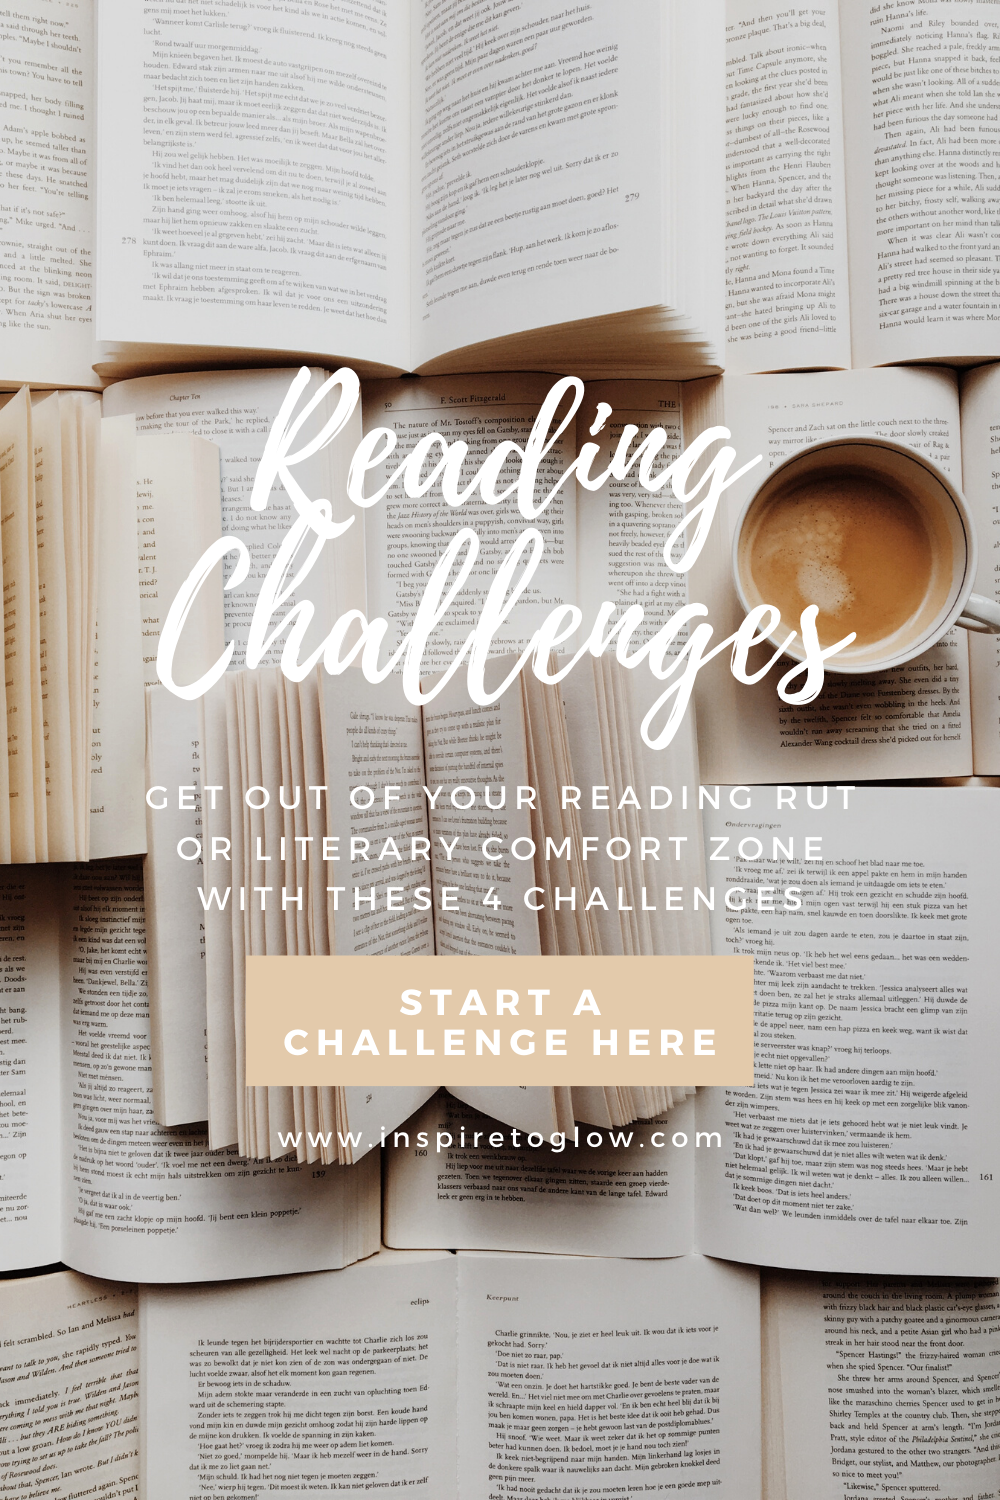 Get out of your reading rut or literary comfort zone with these reading challenges